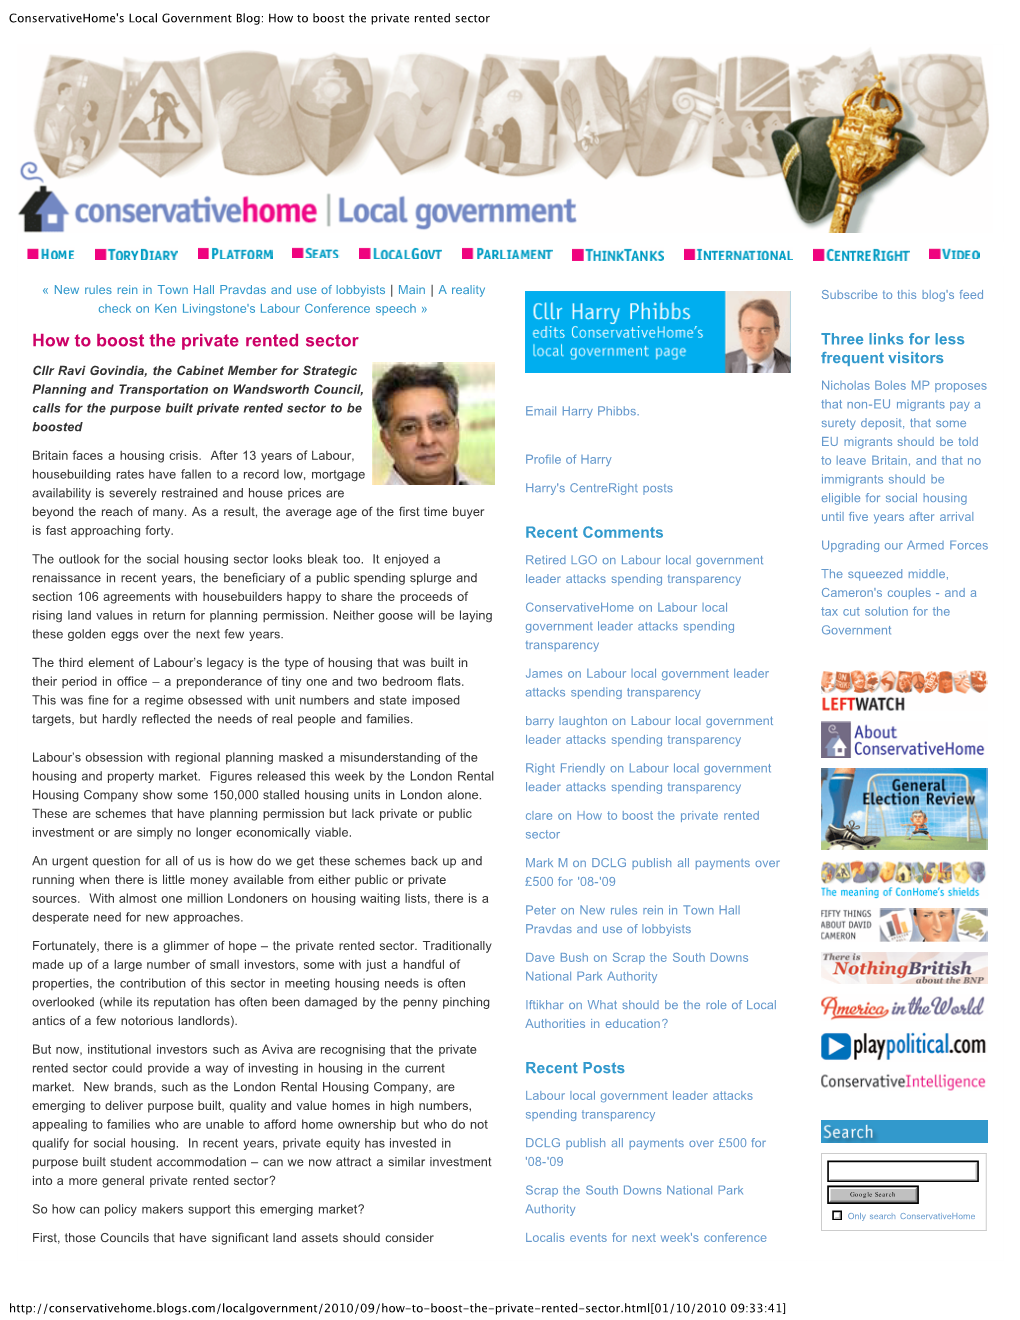 Conservativehome's Local Government Blog: How to Boost the Private Rented Sector